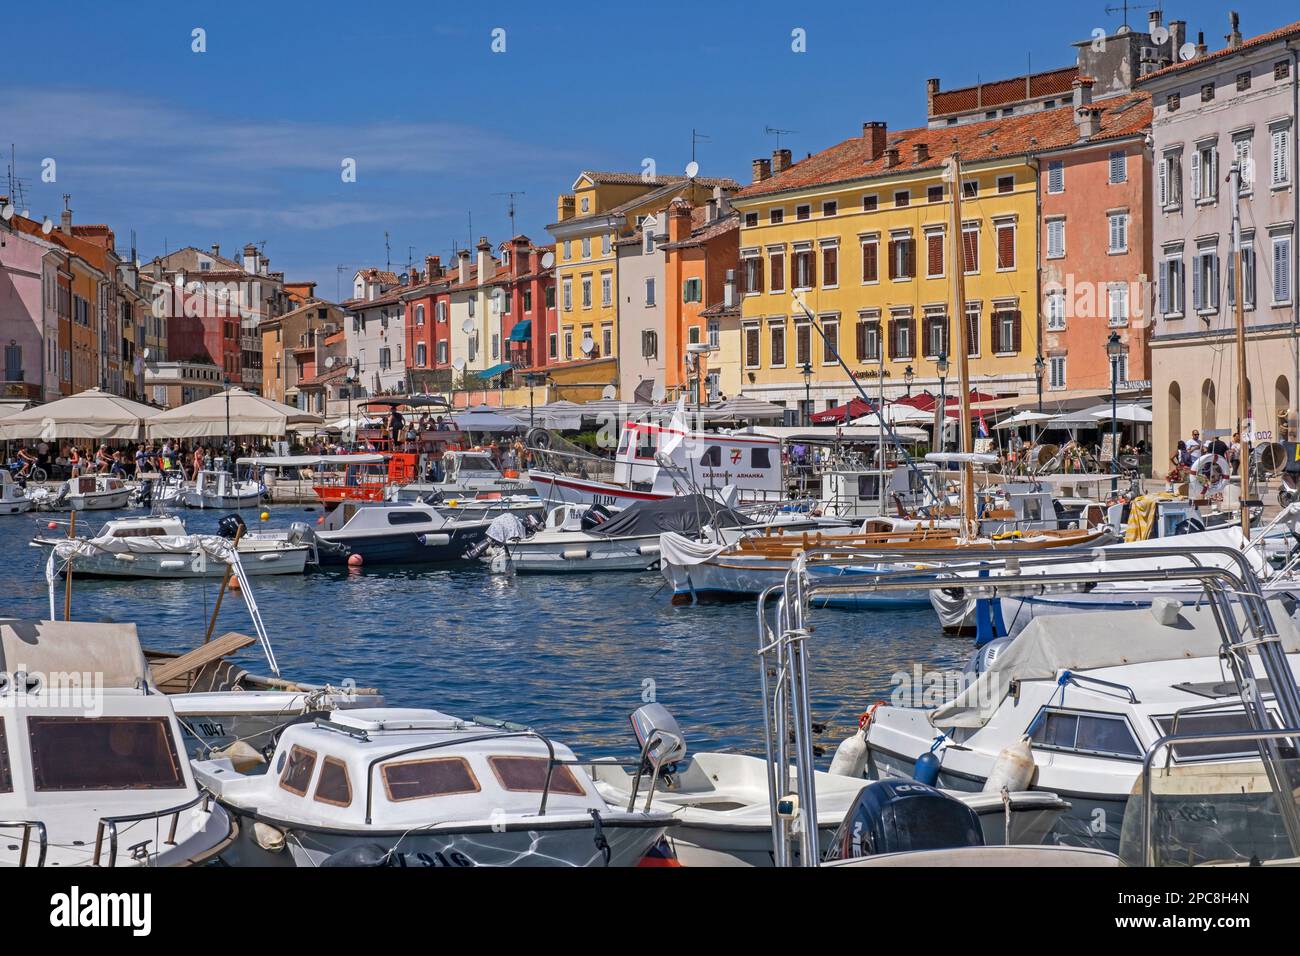 Fishing boats and sailing boats in the the harbour of the city Rovinj / Rovigno, seaside resort along the north Adriatic Sea, Istria County, Croatia Stock Photo